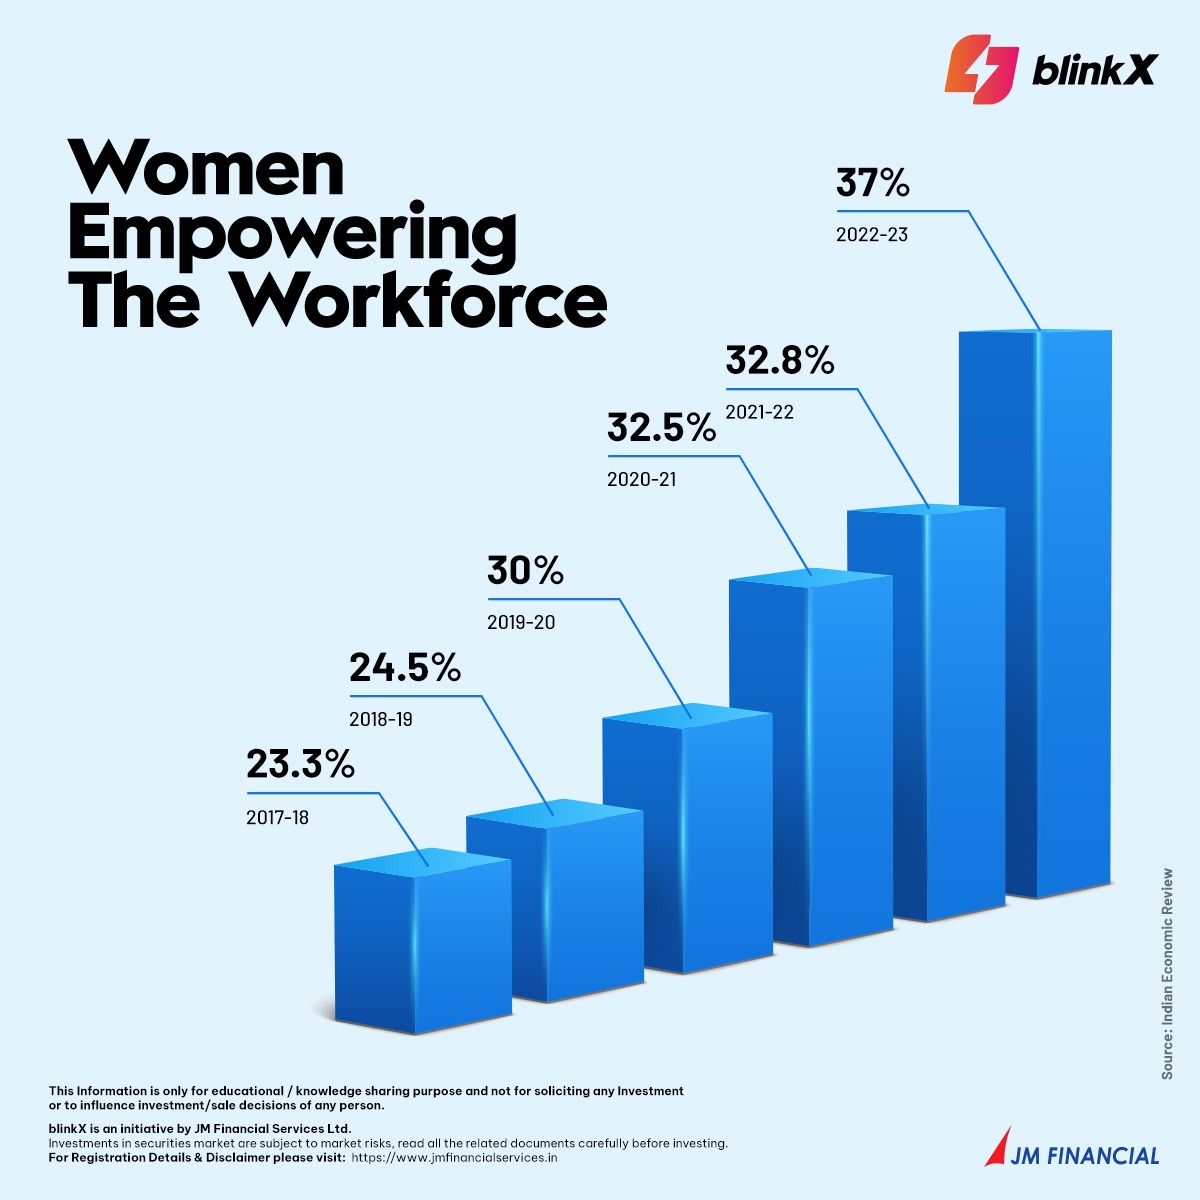 From 23% to a remarkable 37% - Women are leading the charge in shaping India's future economy! 💼🌟

#womensupportingwomen #womenempowerment #women #womeninbusiness #womenempoweringwomen #embraceequity #embraceequality #womeninwork #WorkforceManagement #WorkforceManagement